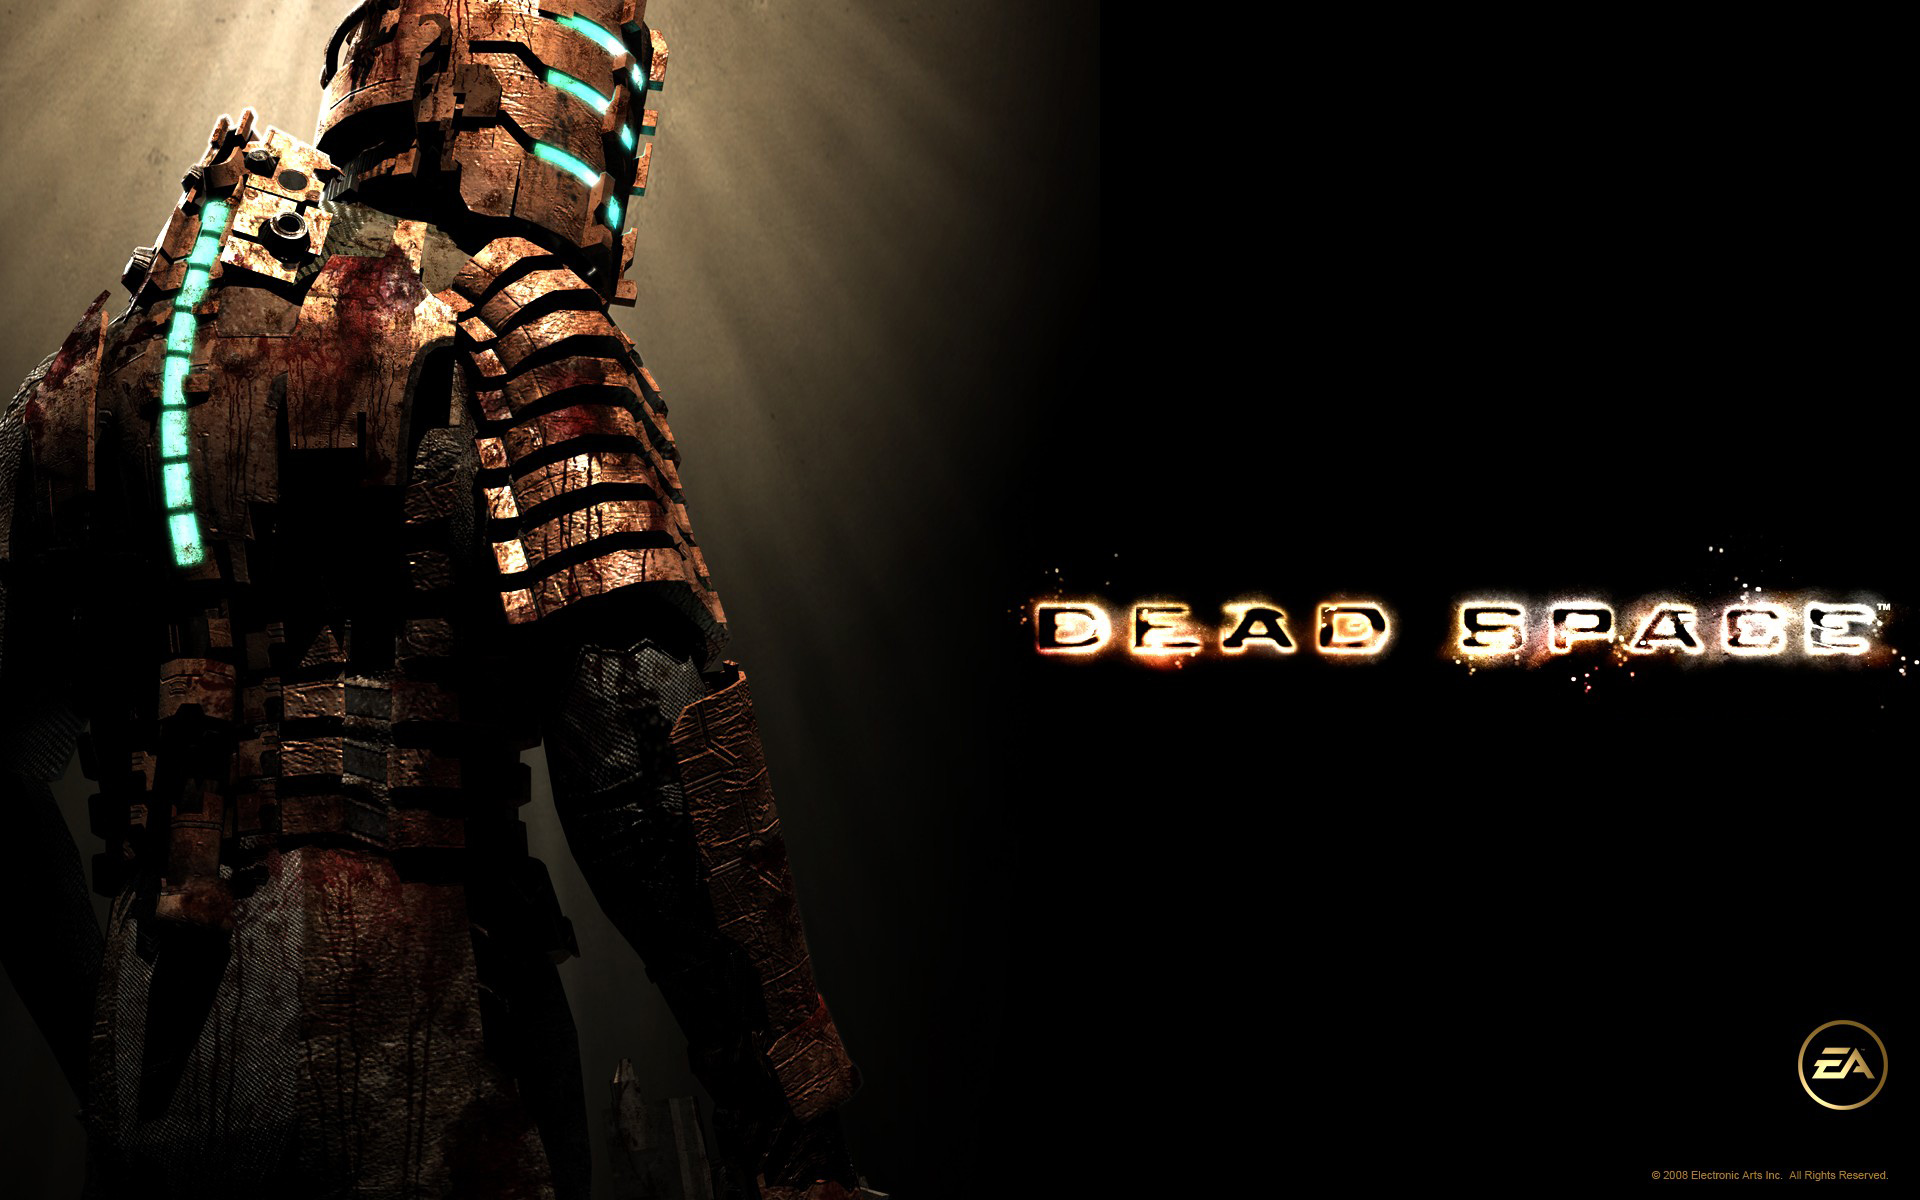 dead space wallpaper,cg artwork,darkness,digital compositing,action figure,pc game